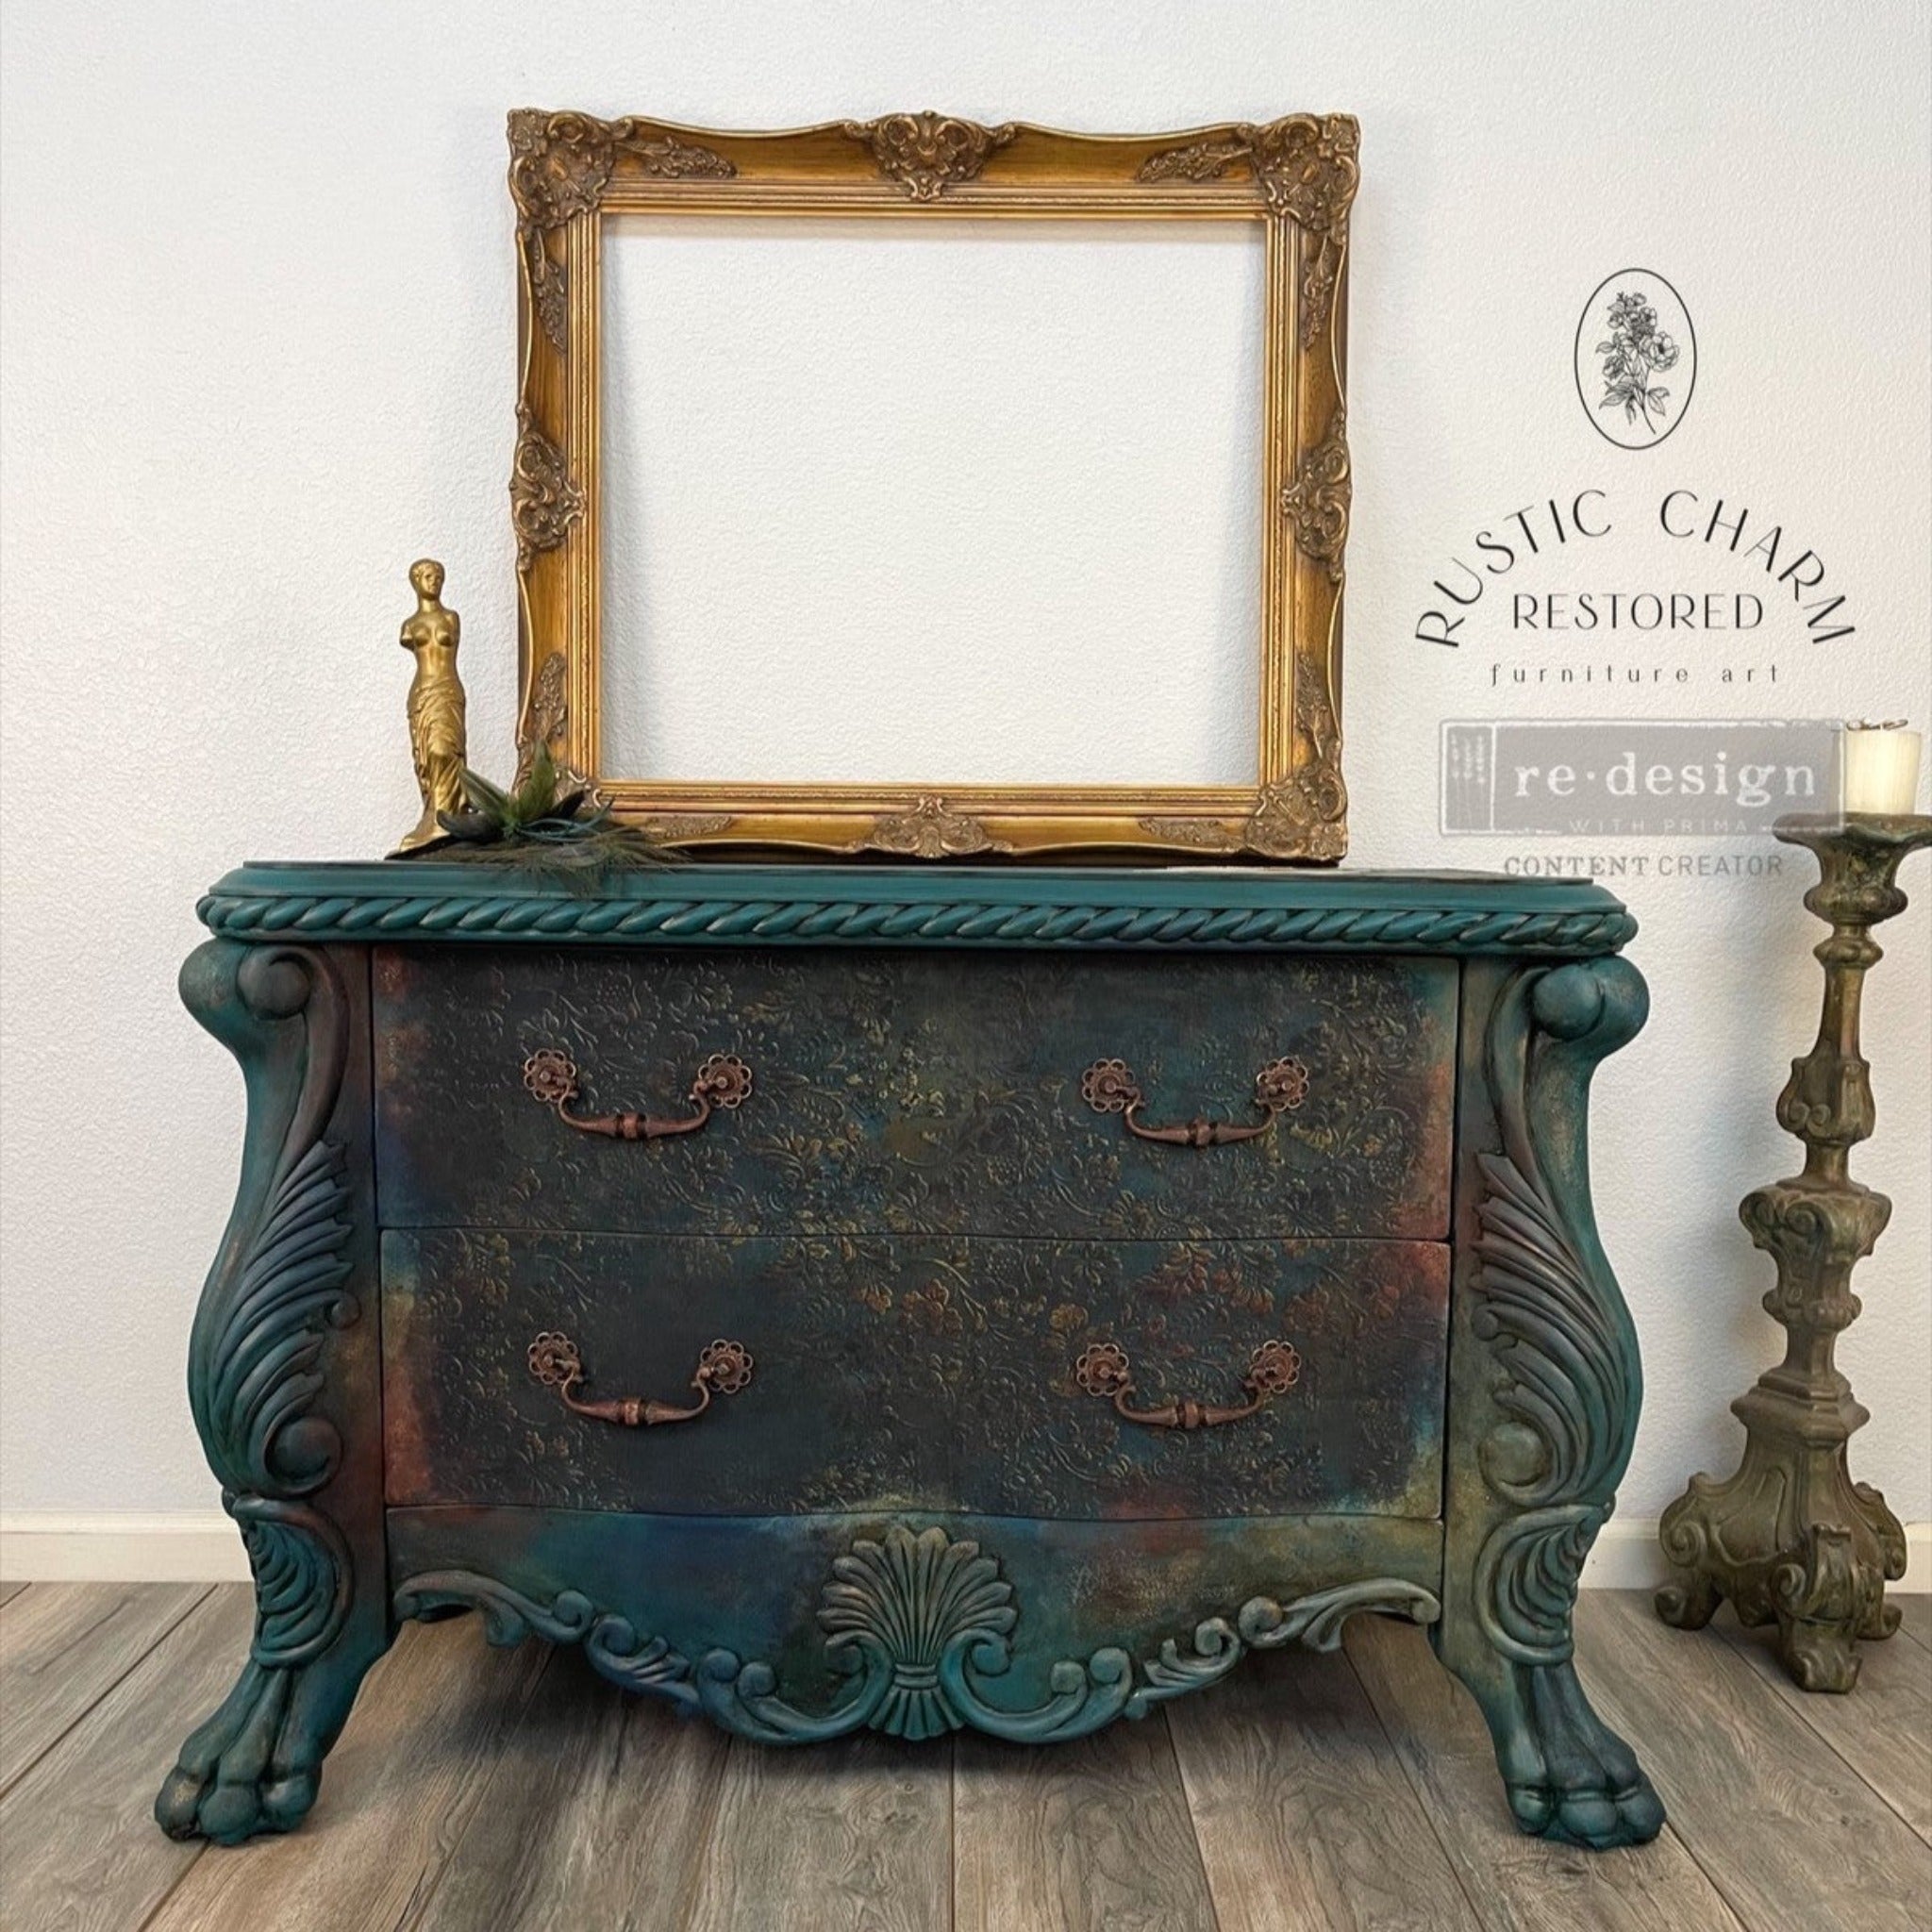 A vintage 2-drawer dresser refurbished by Rustic Charm Restored is painted a blend of dark teal, rust orange, and golden yellow and features ReDesign with Prima's Aged Patina A1 fiber paper on its drawers.